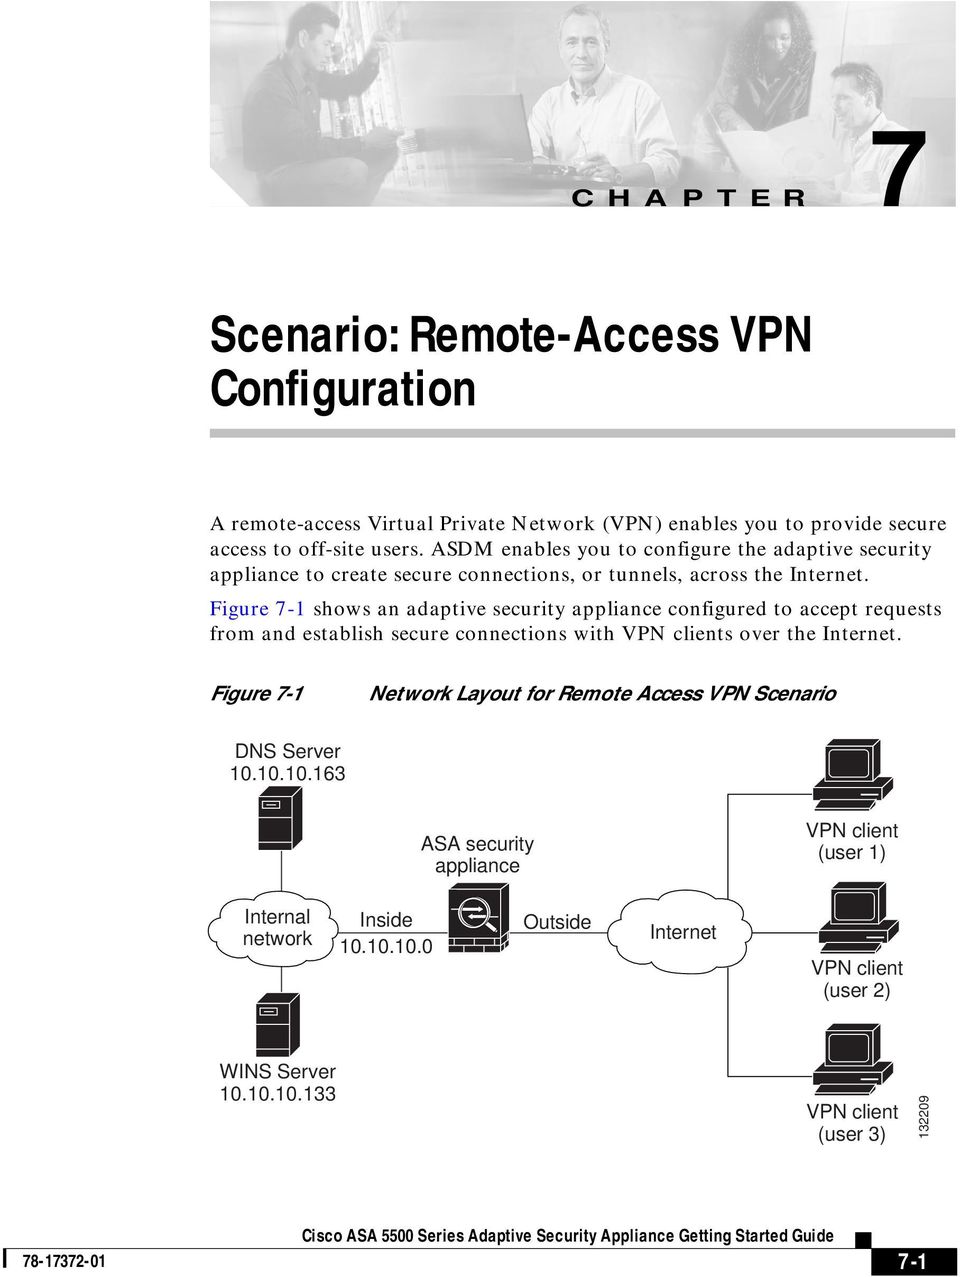 Figure 7-1 shows an adaptive security appliance configured to accept requests from and establish secure connections with VPN clients over the Internet.